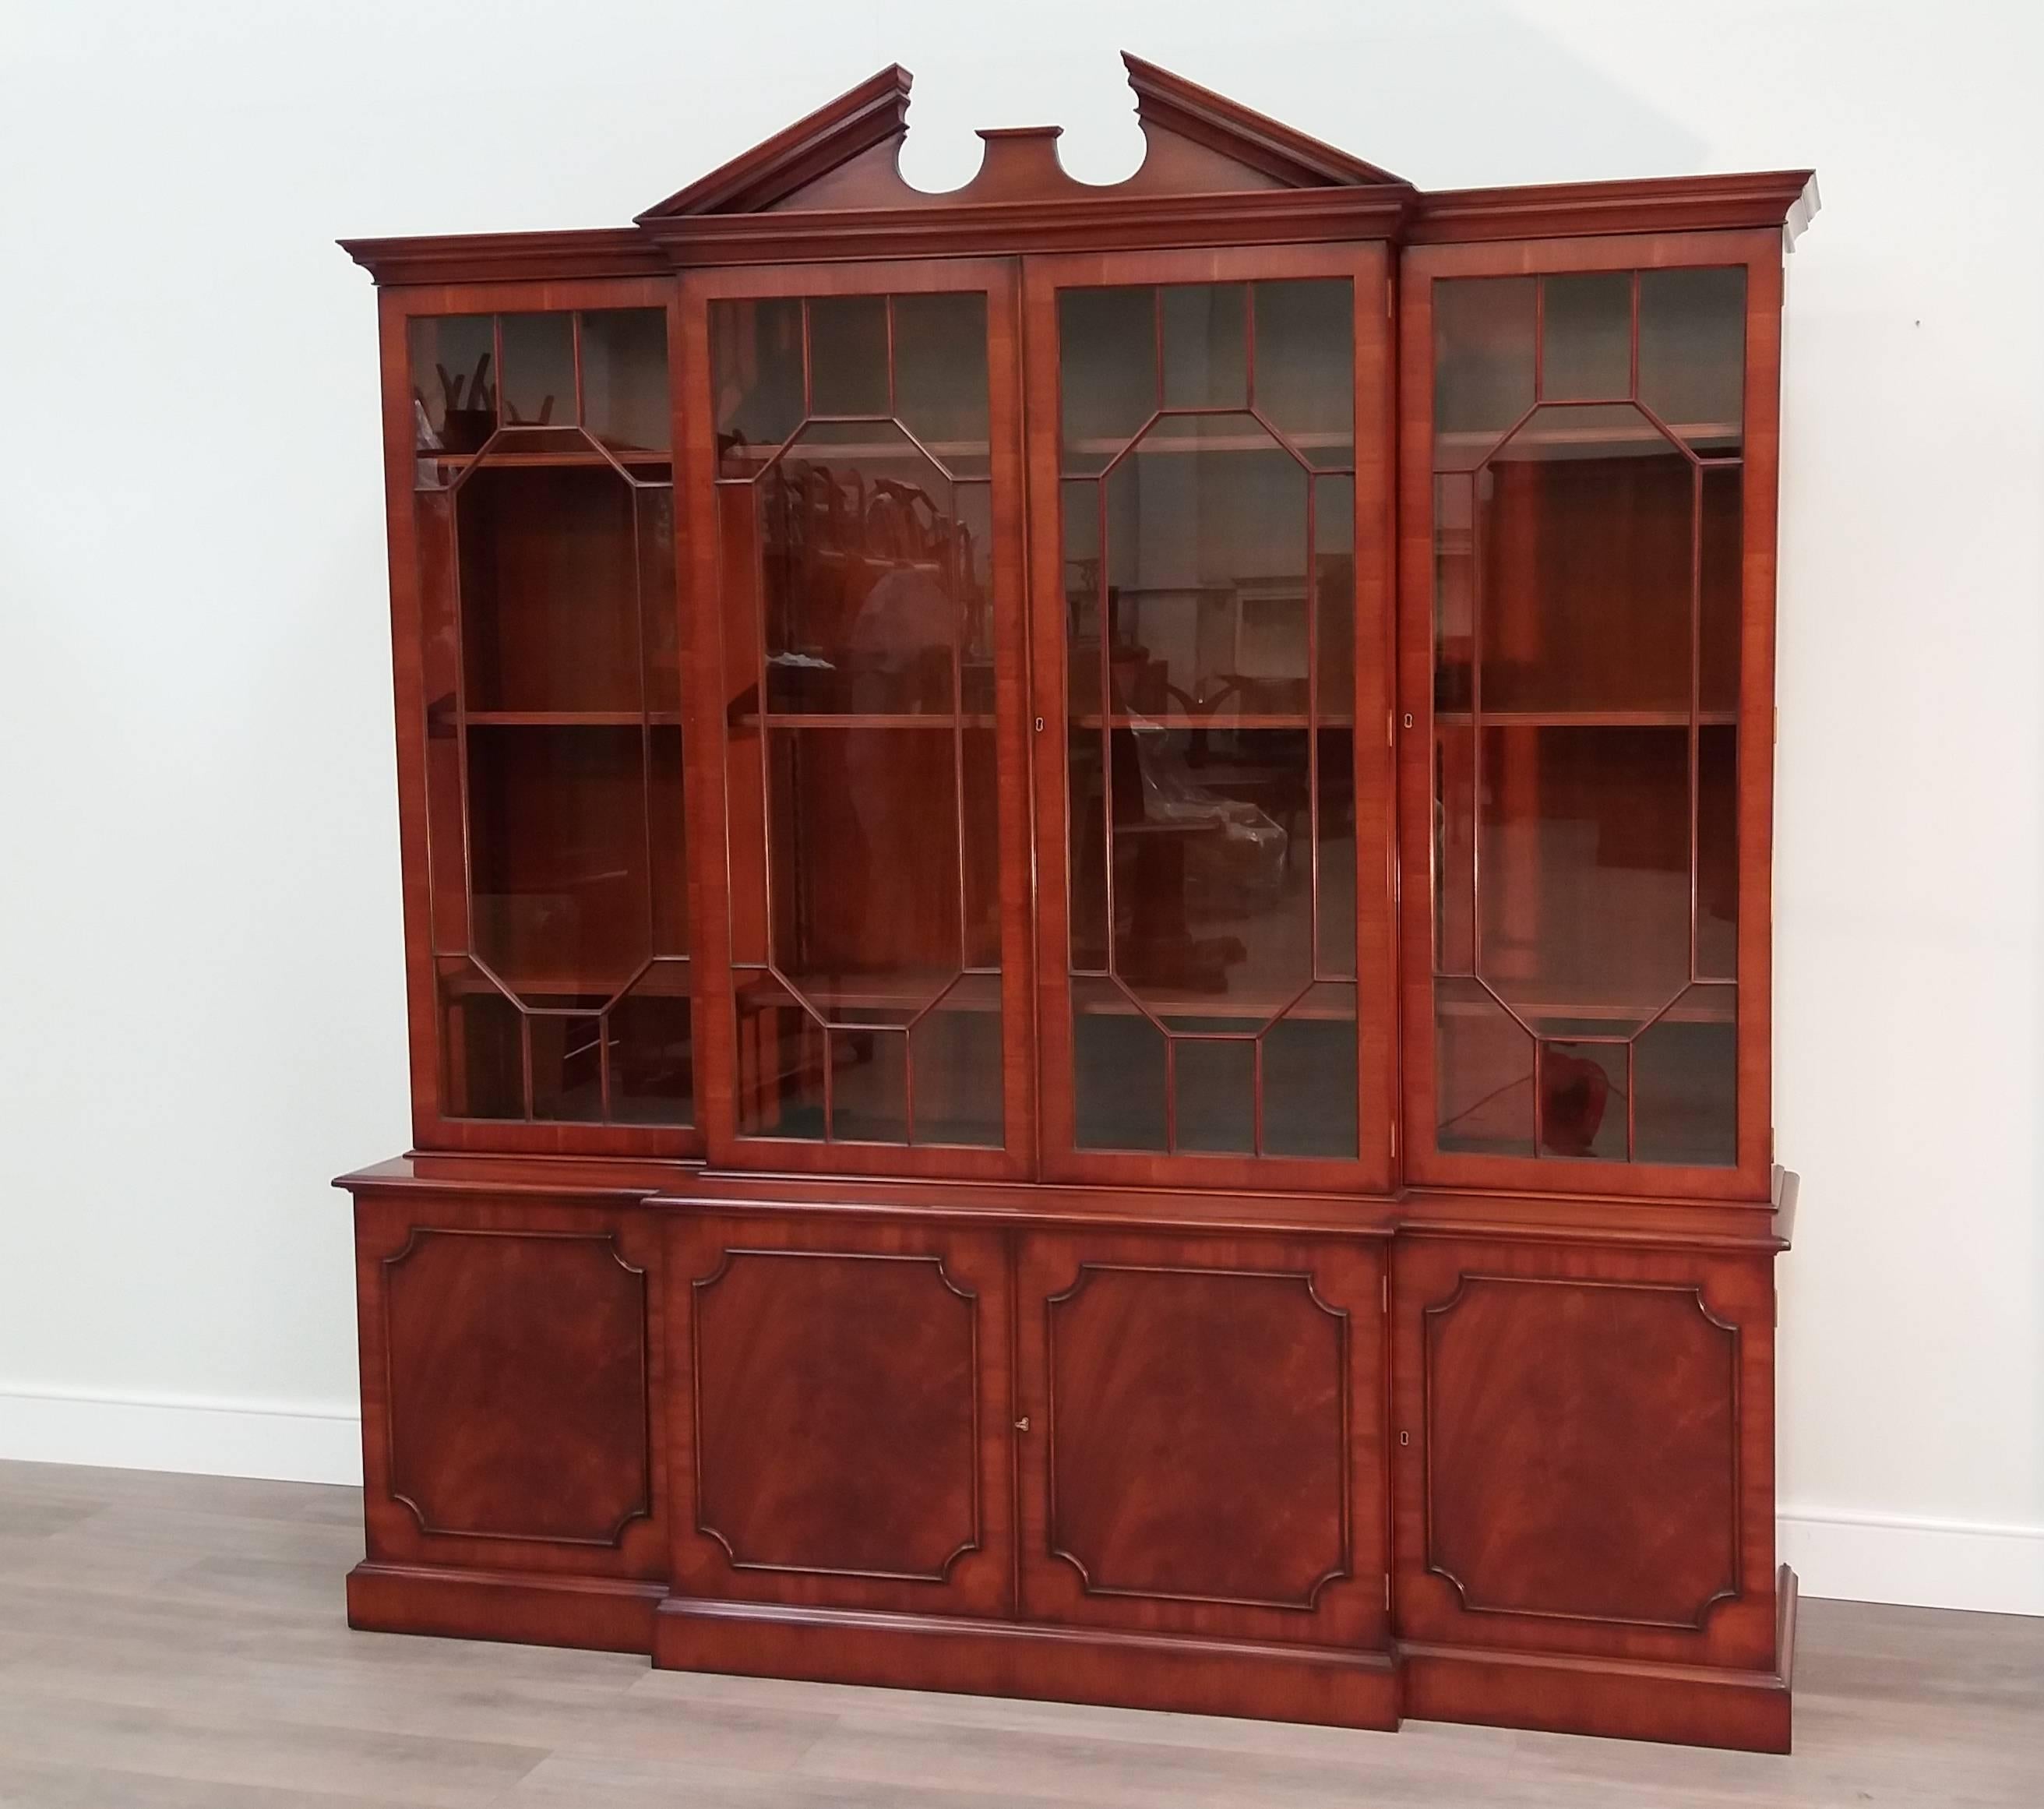 An impressive mid-Georgian style mahogany breakfront glazed bookcase, featuring a broken arch pediment and adjustable shelves behind individually glazed doors. The figured mahogany doors reveal further adjustable shelves in the base - all